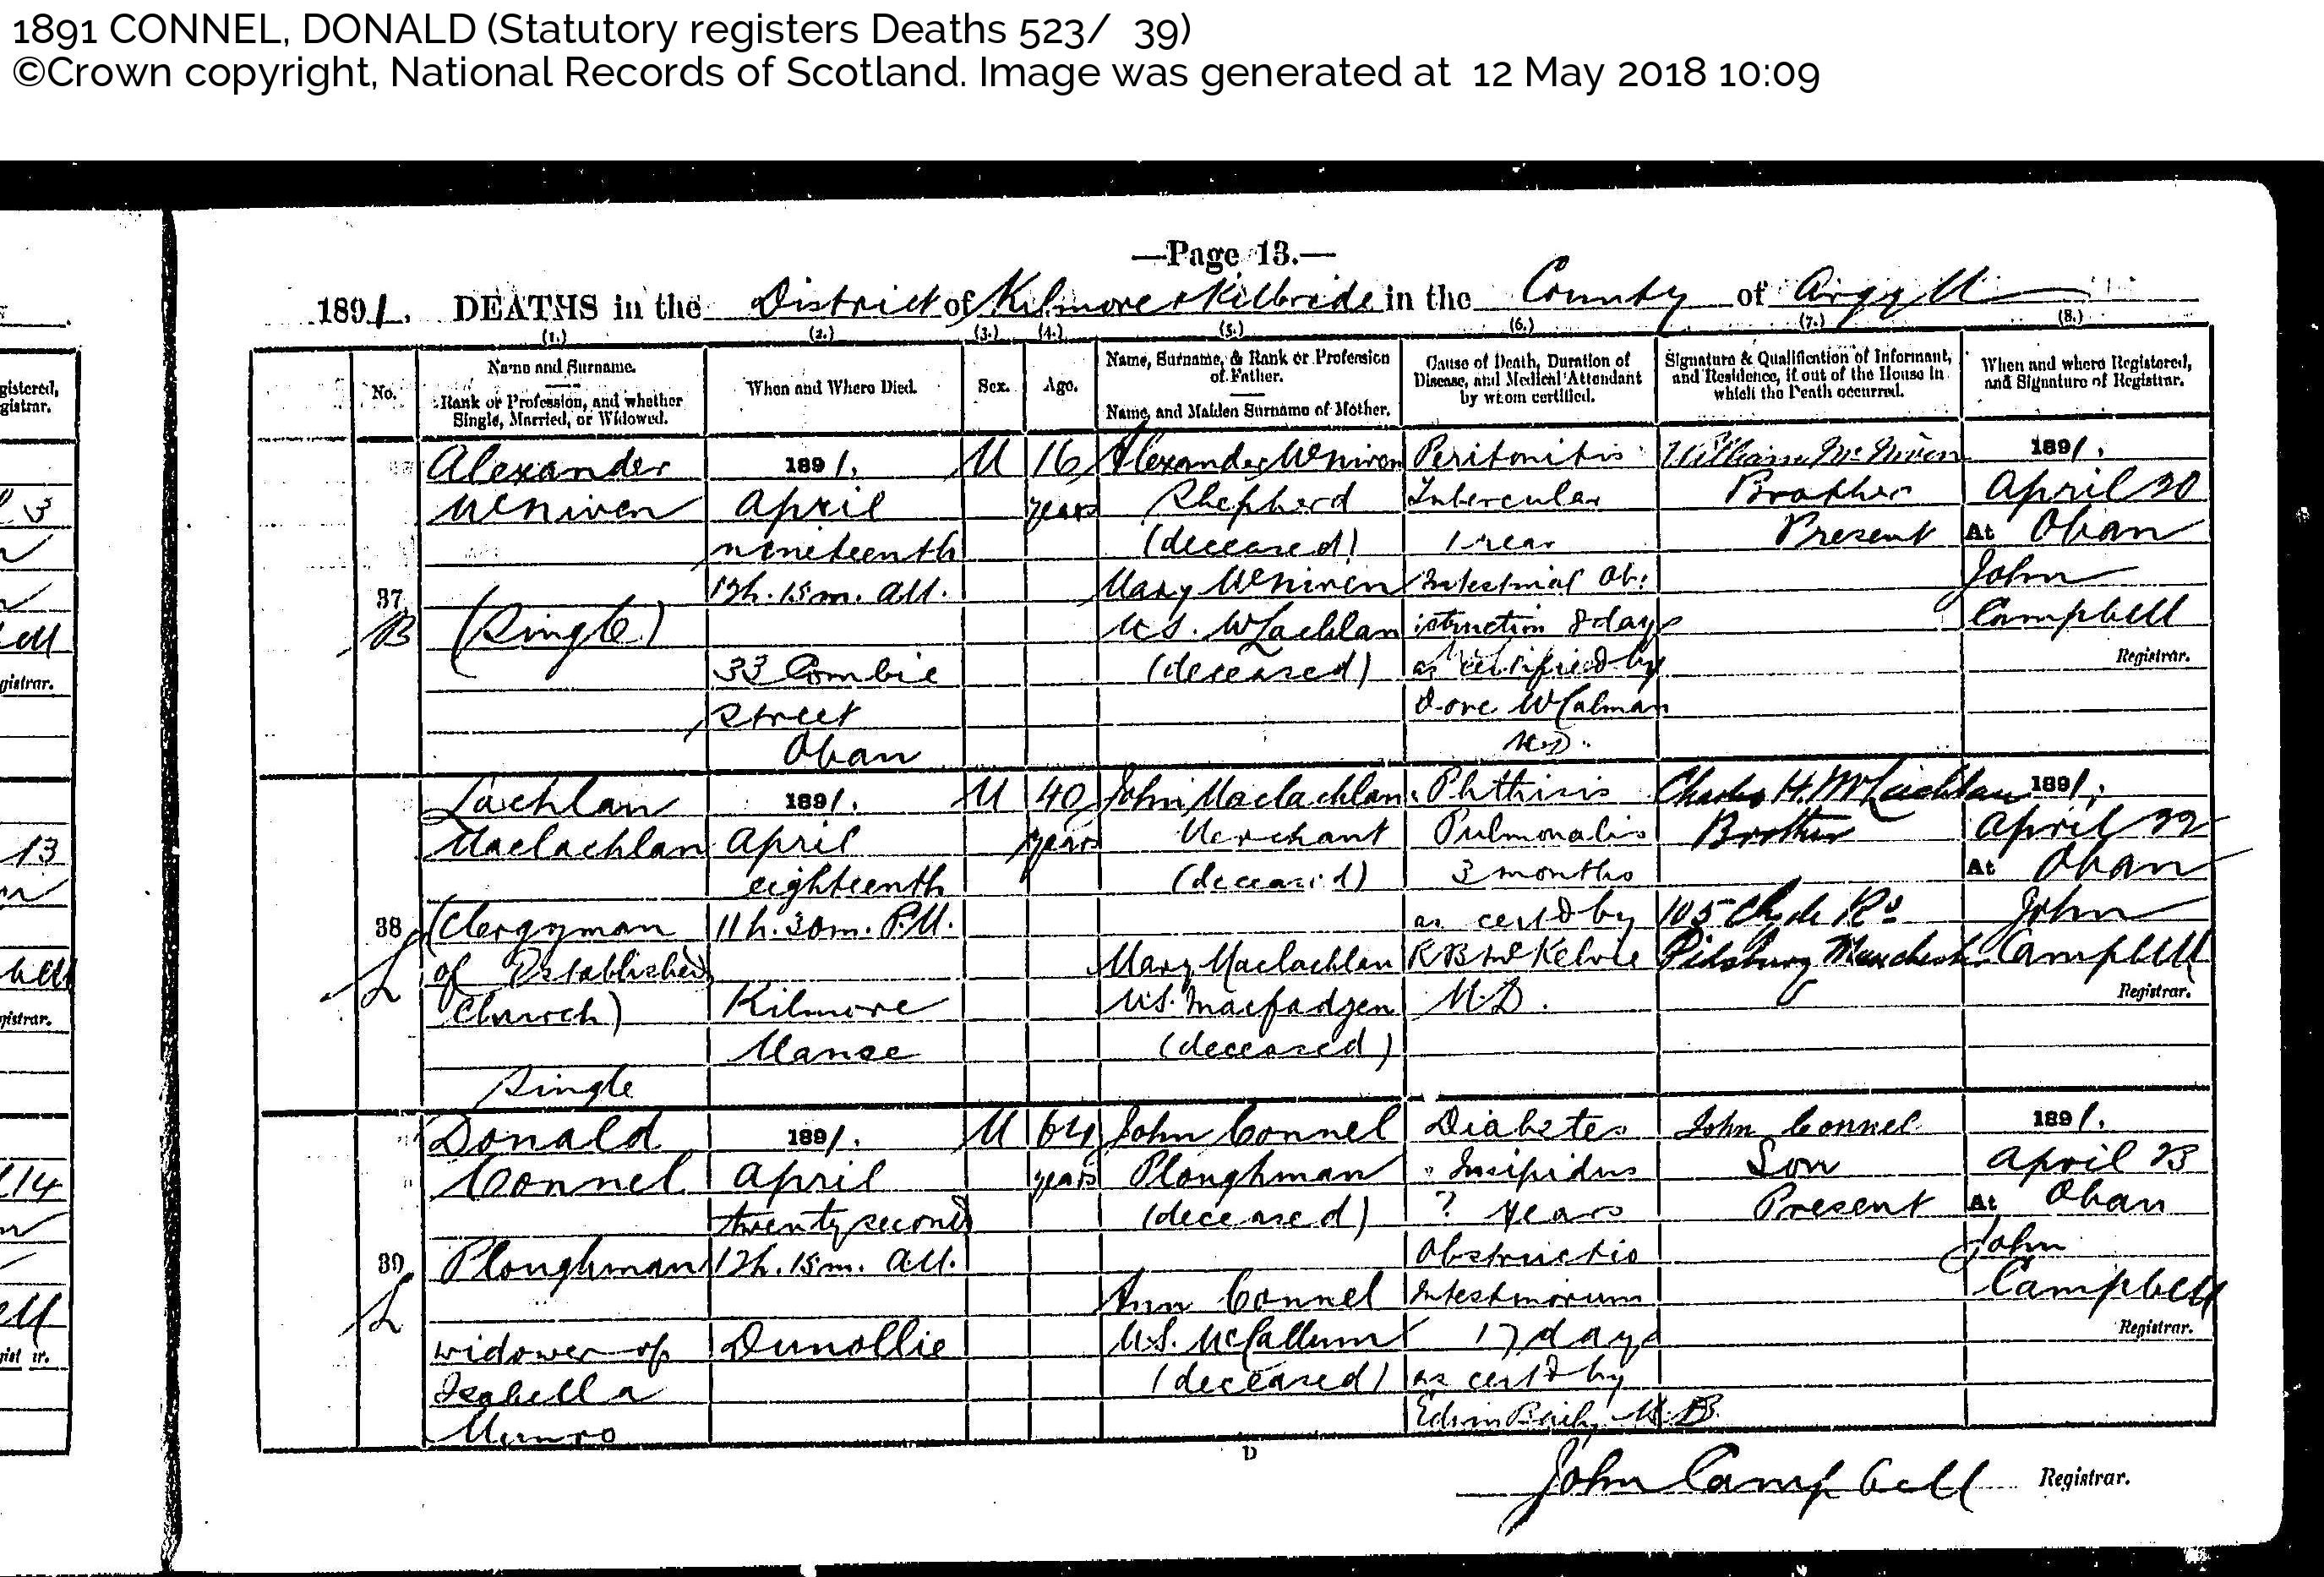 DonaldConnel_D1891, April 22, 1891, Linked To: <a href='profiles/i2561.html' >Ann McCallum</a>